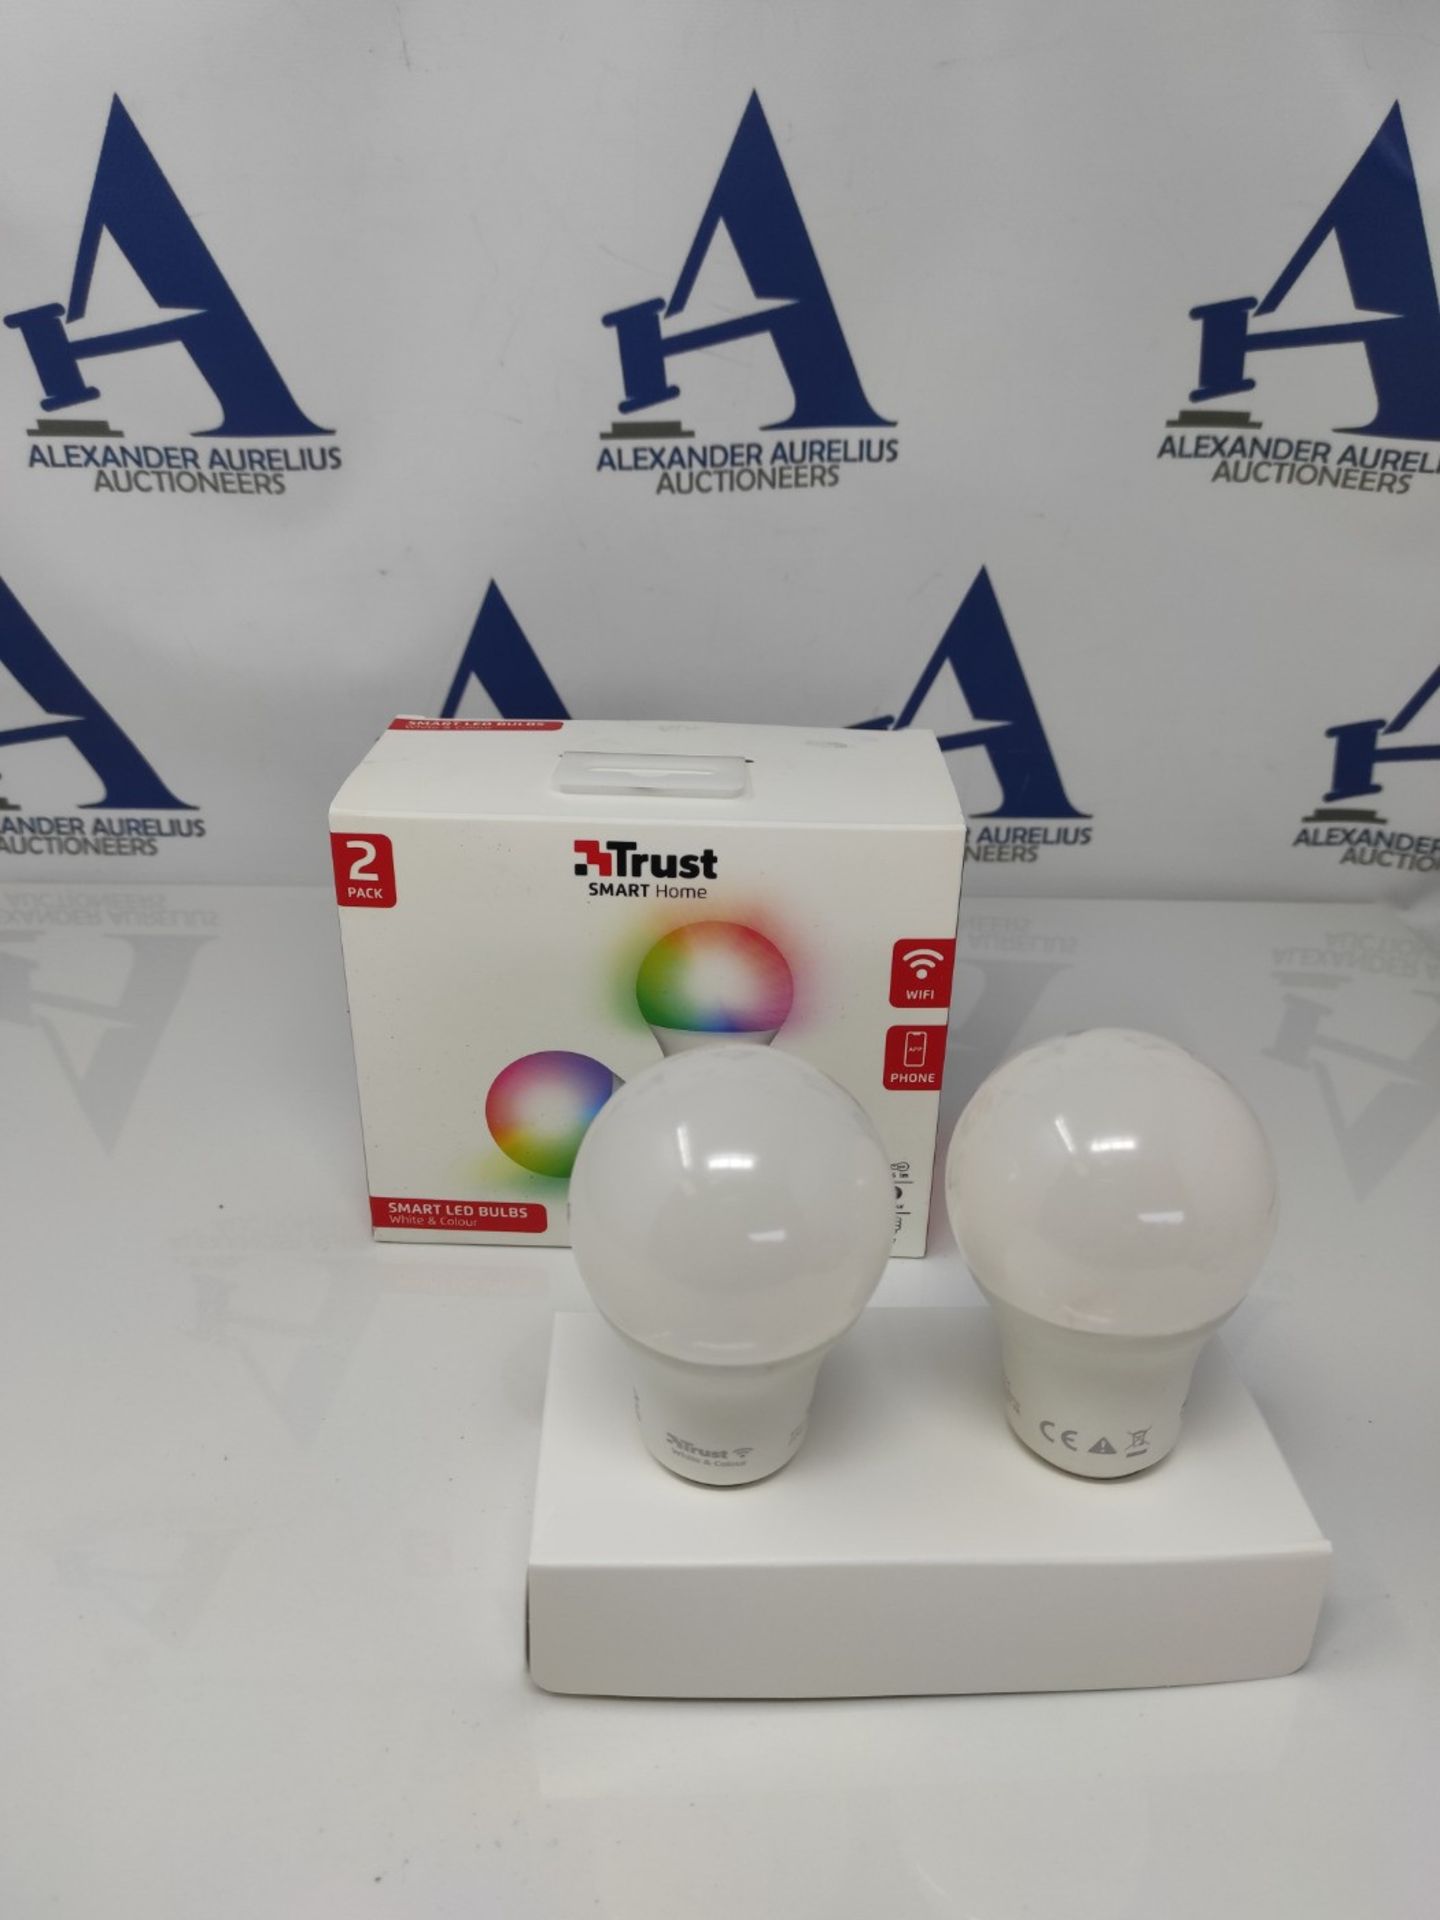 Trust WiFi E27 Smart Bulb, Colour Changing Light Bulb, Works with Alexa and Google Hom - Image 2 of 2